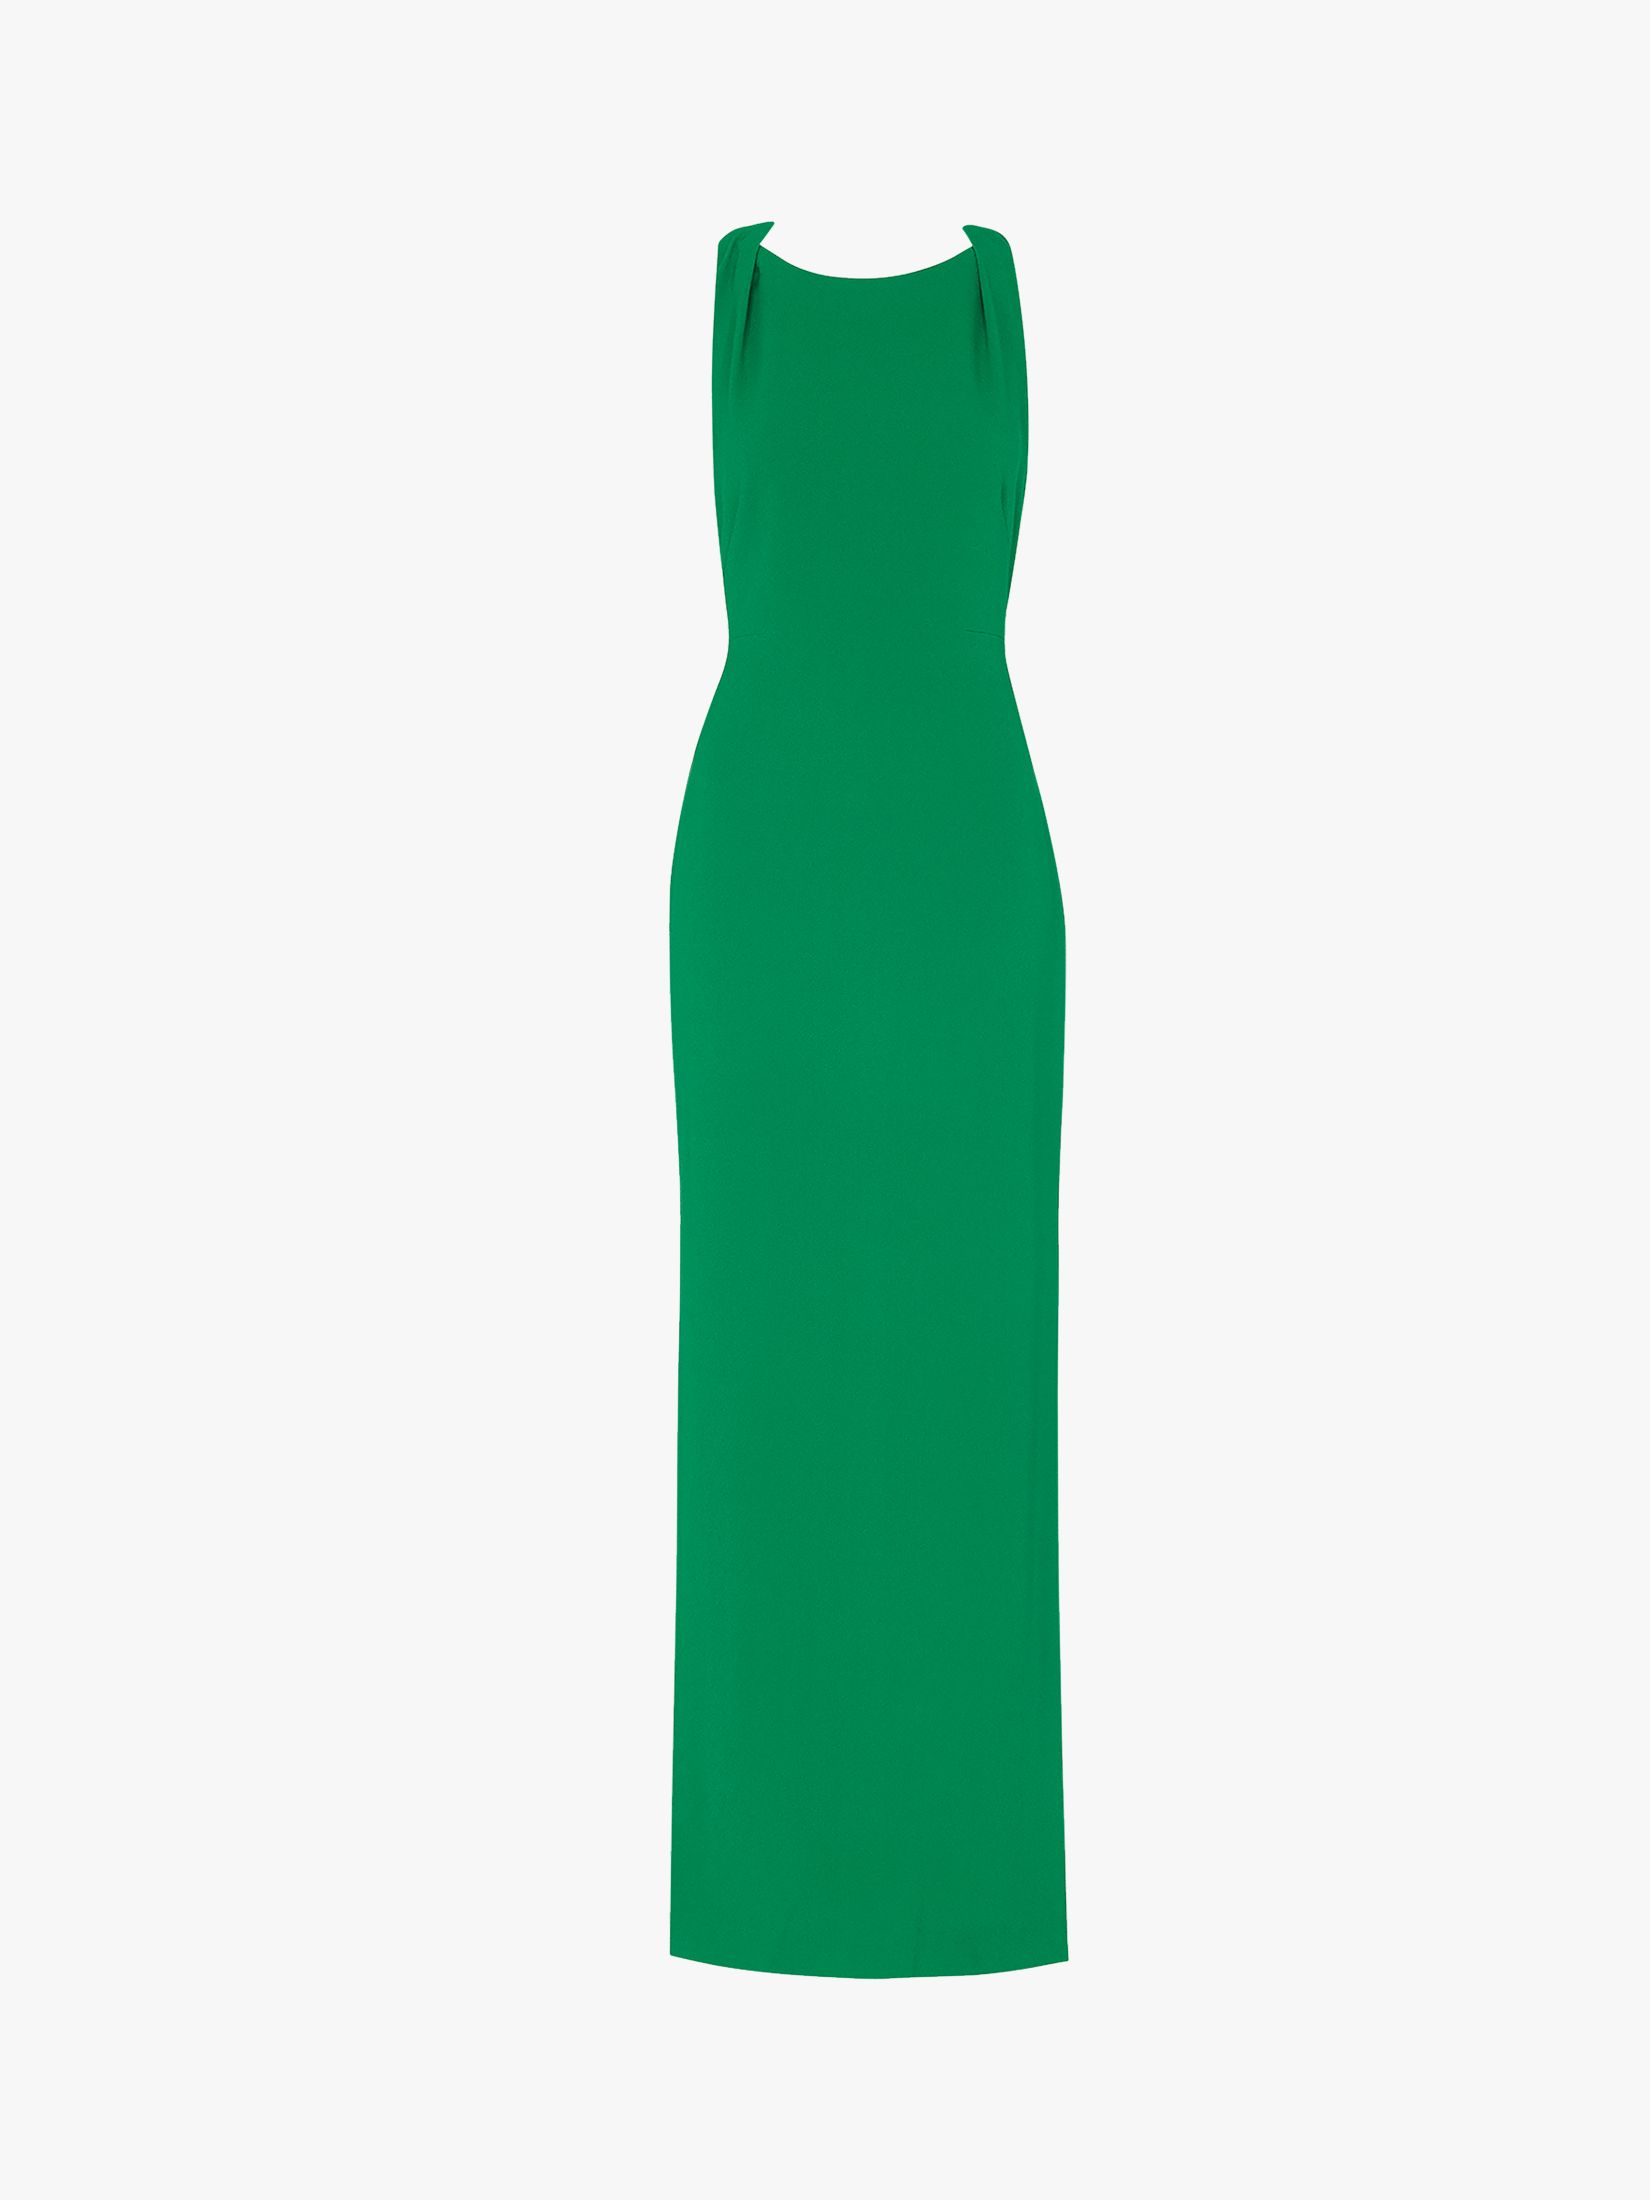 Buy Whistles Tie Back Maxi Dress Online at johnlewis.com